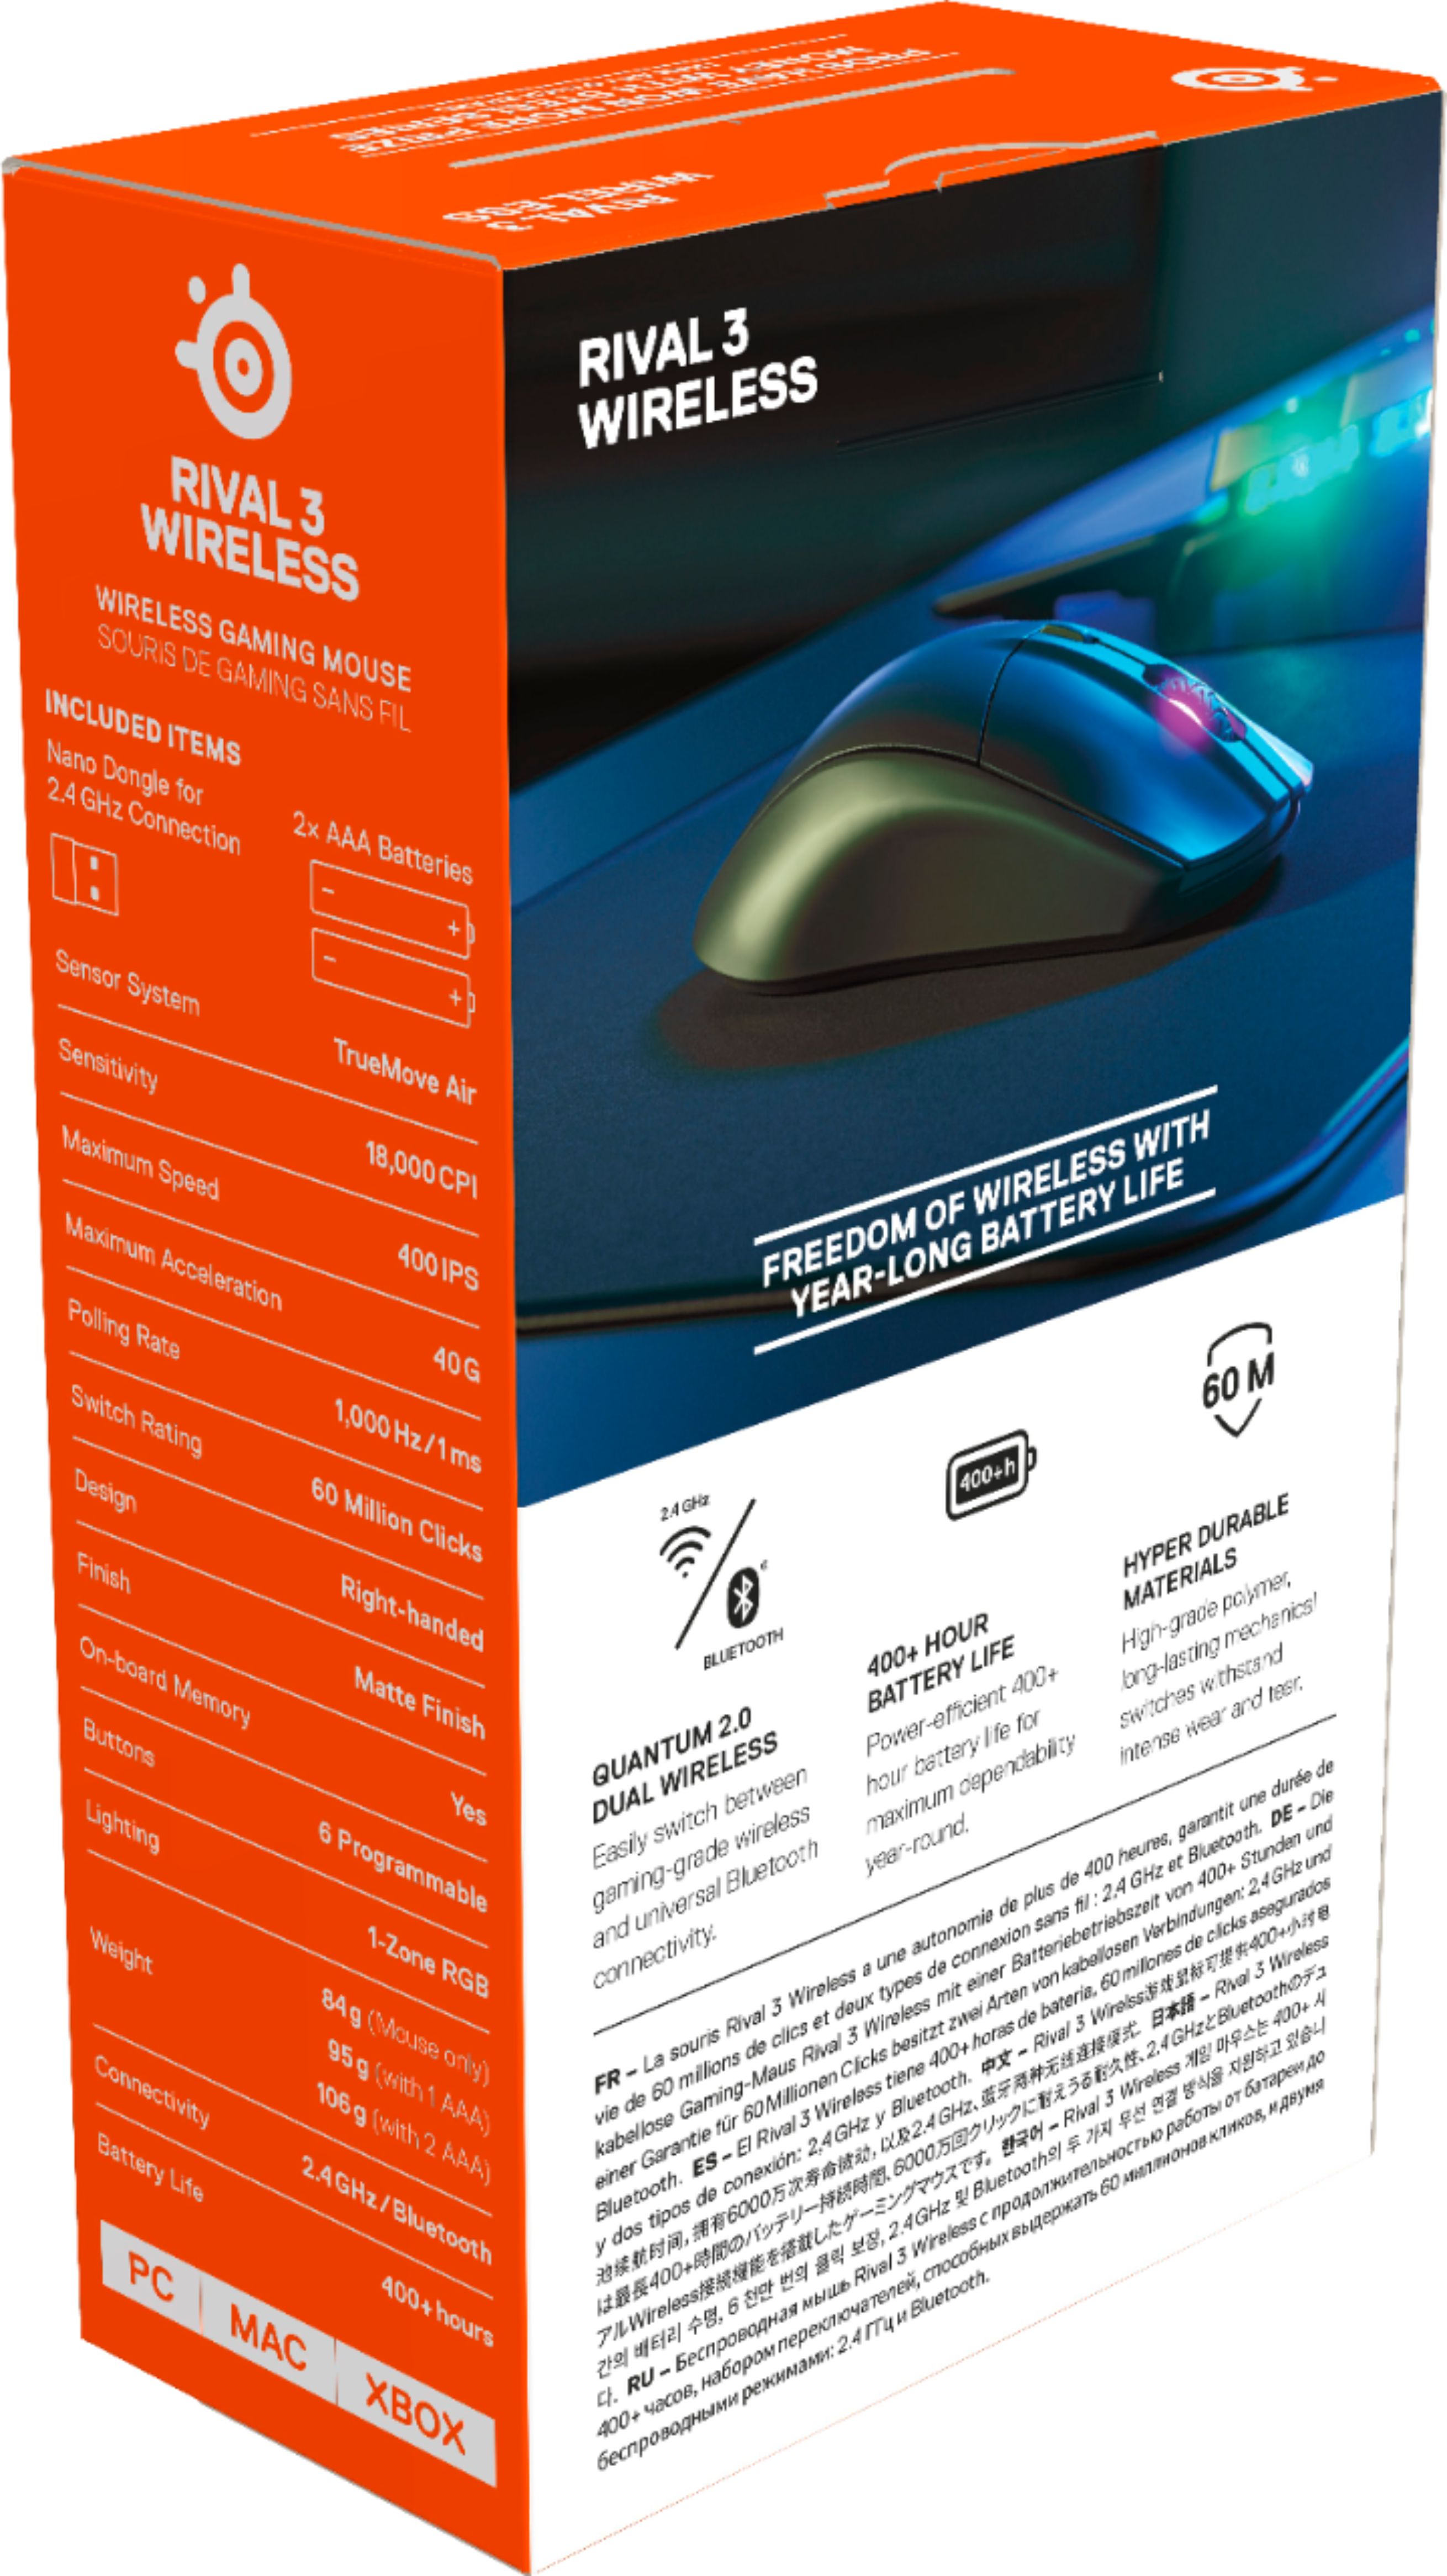 400-hour battery life! – SteelSeries Rival 3 Wireless gaming mouse